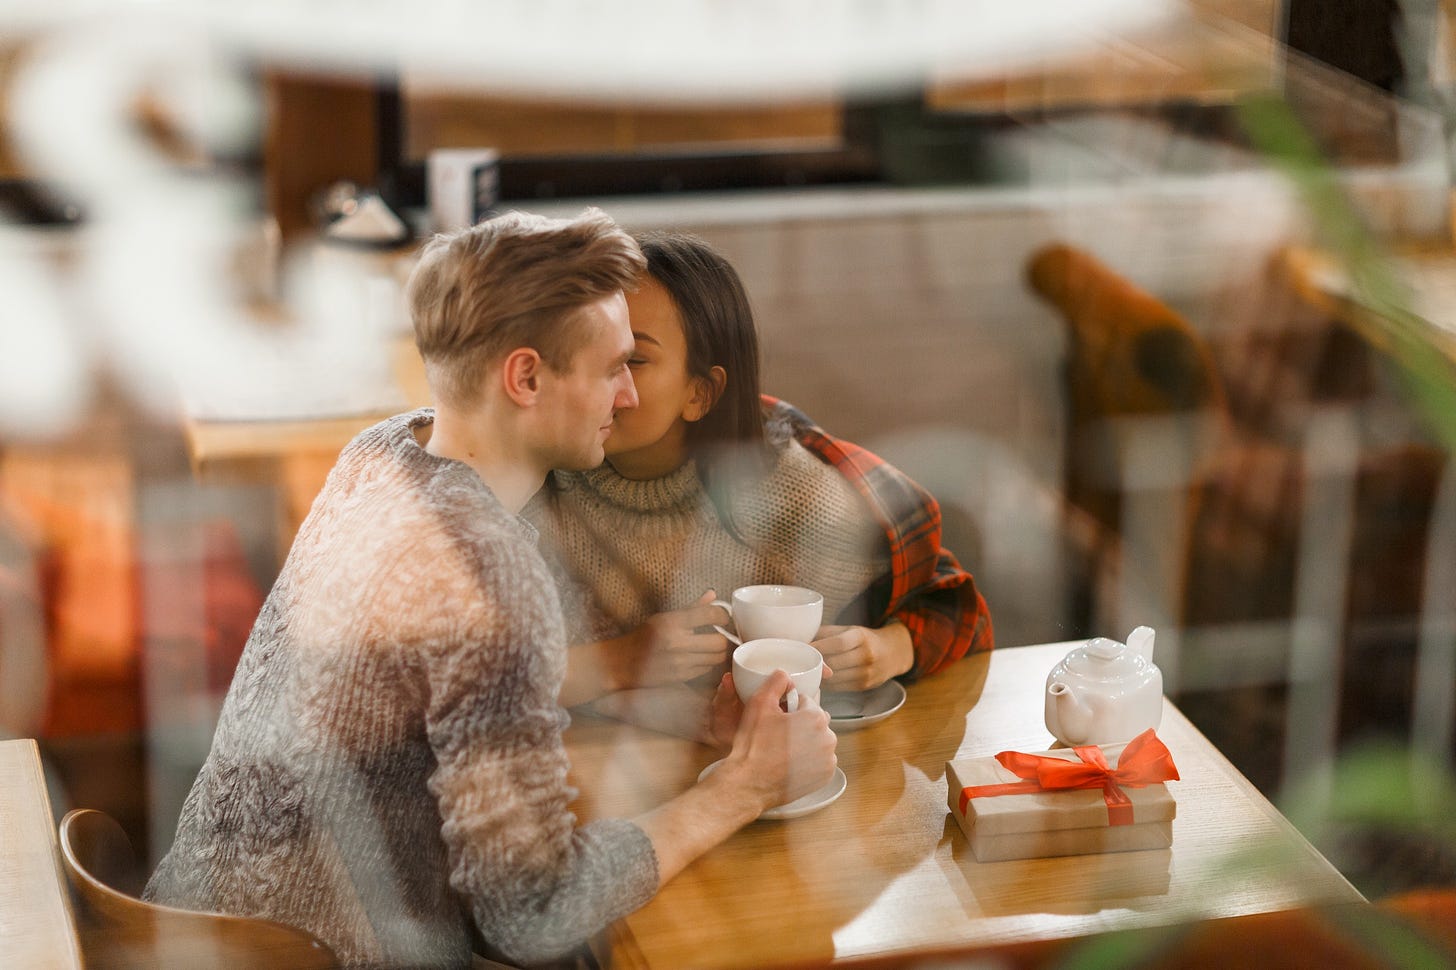 A man and a woman lean into one another flirtaciously in a cafe.